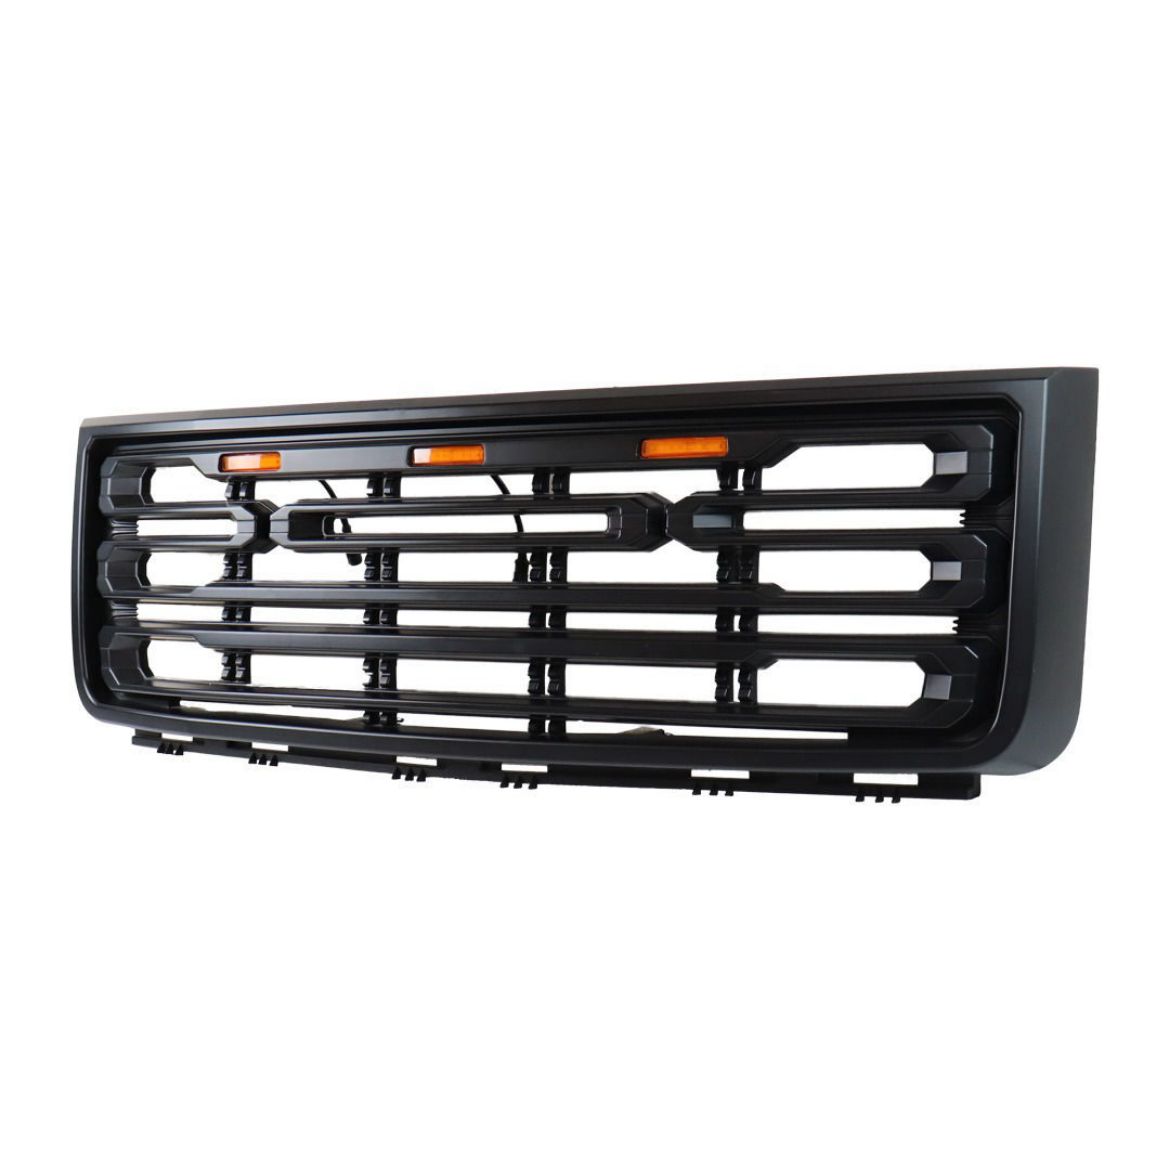 Picture of RockClimber Gmc Sierra Front Grille 2007-2013